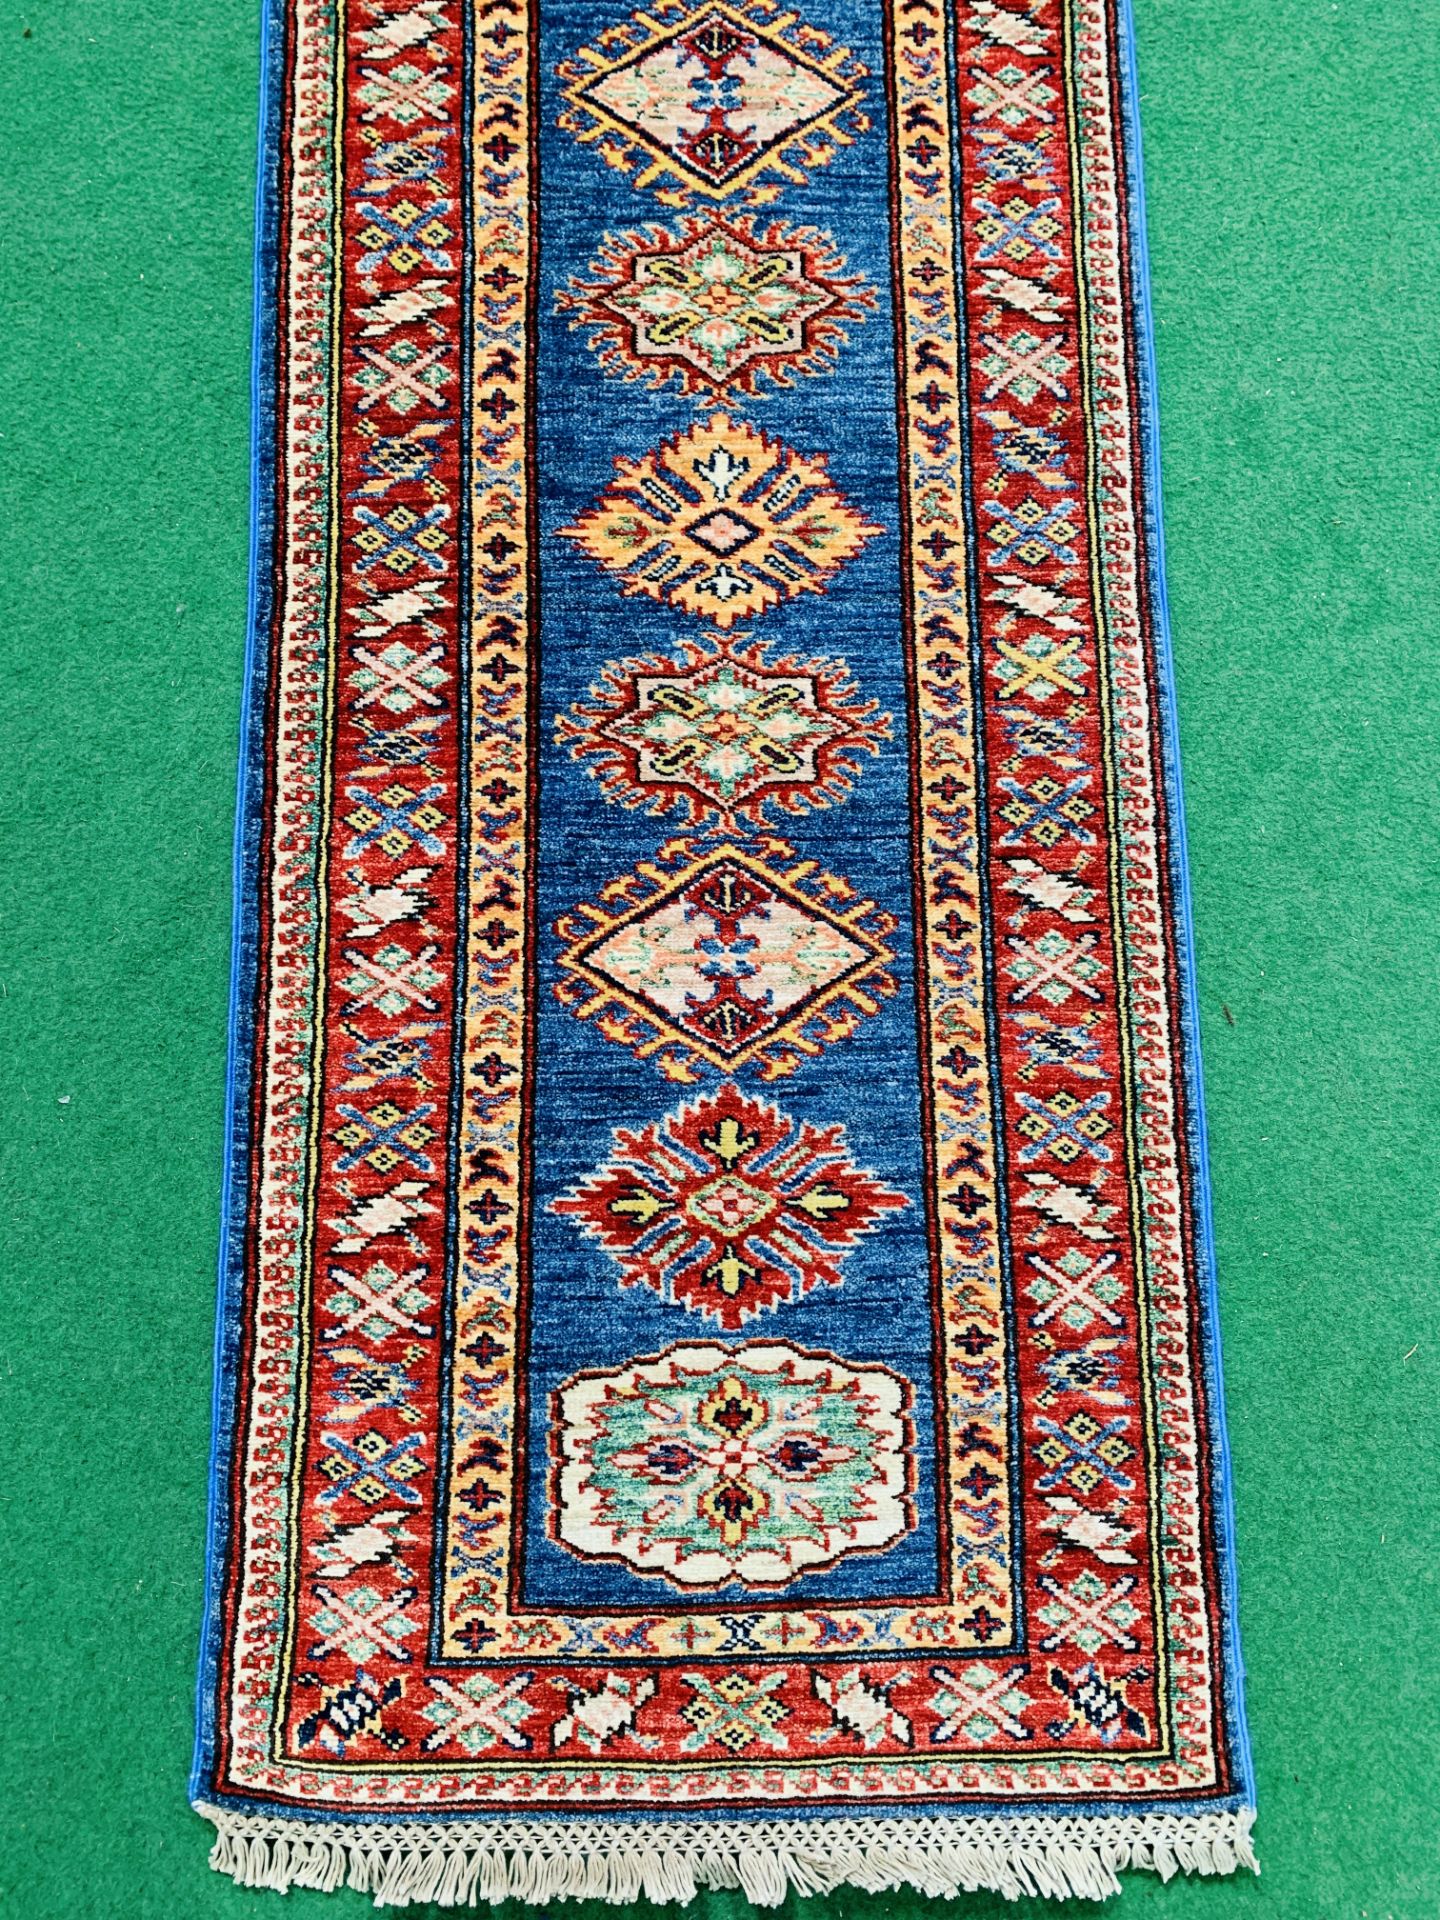 Blue ground Kazak runner and a red ground hand-knotted rug - Image 3 of 8